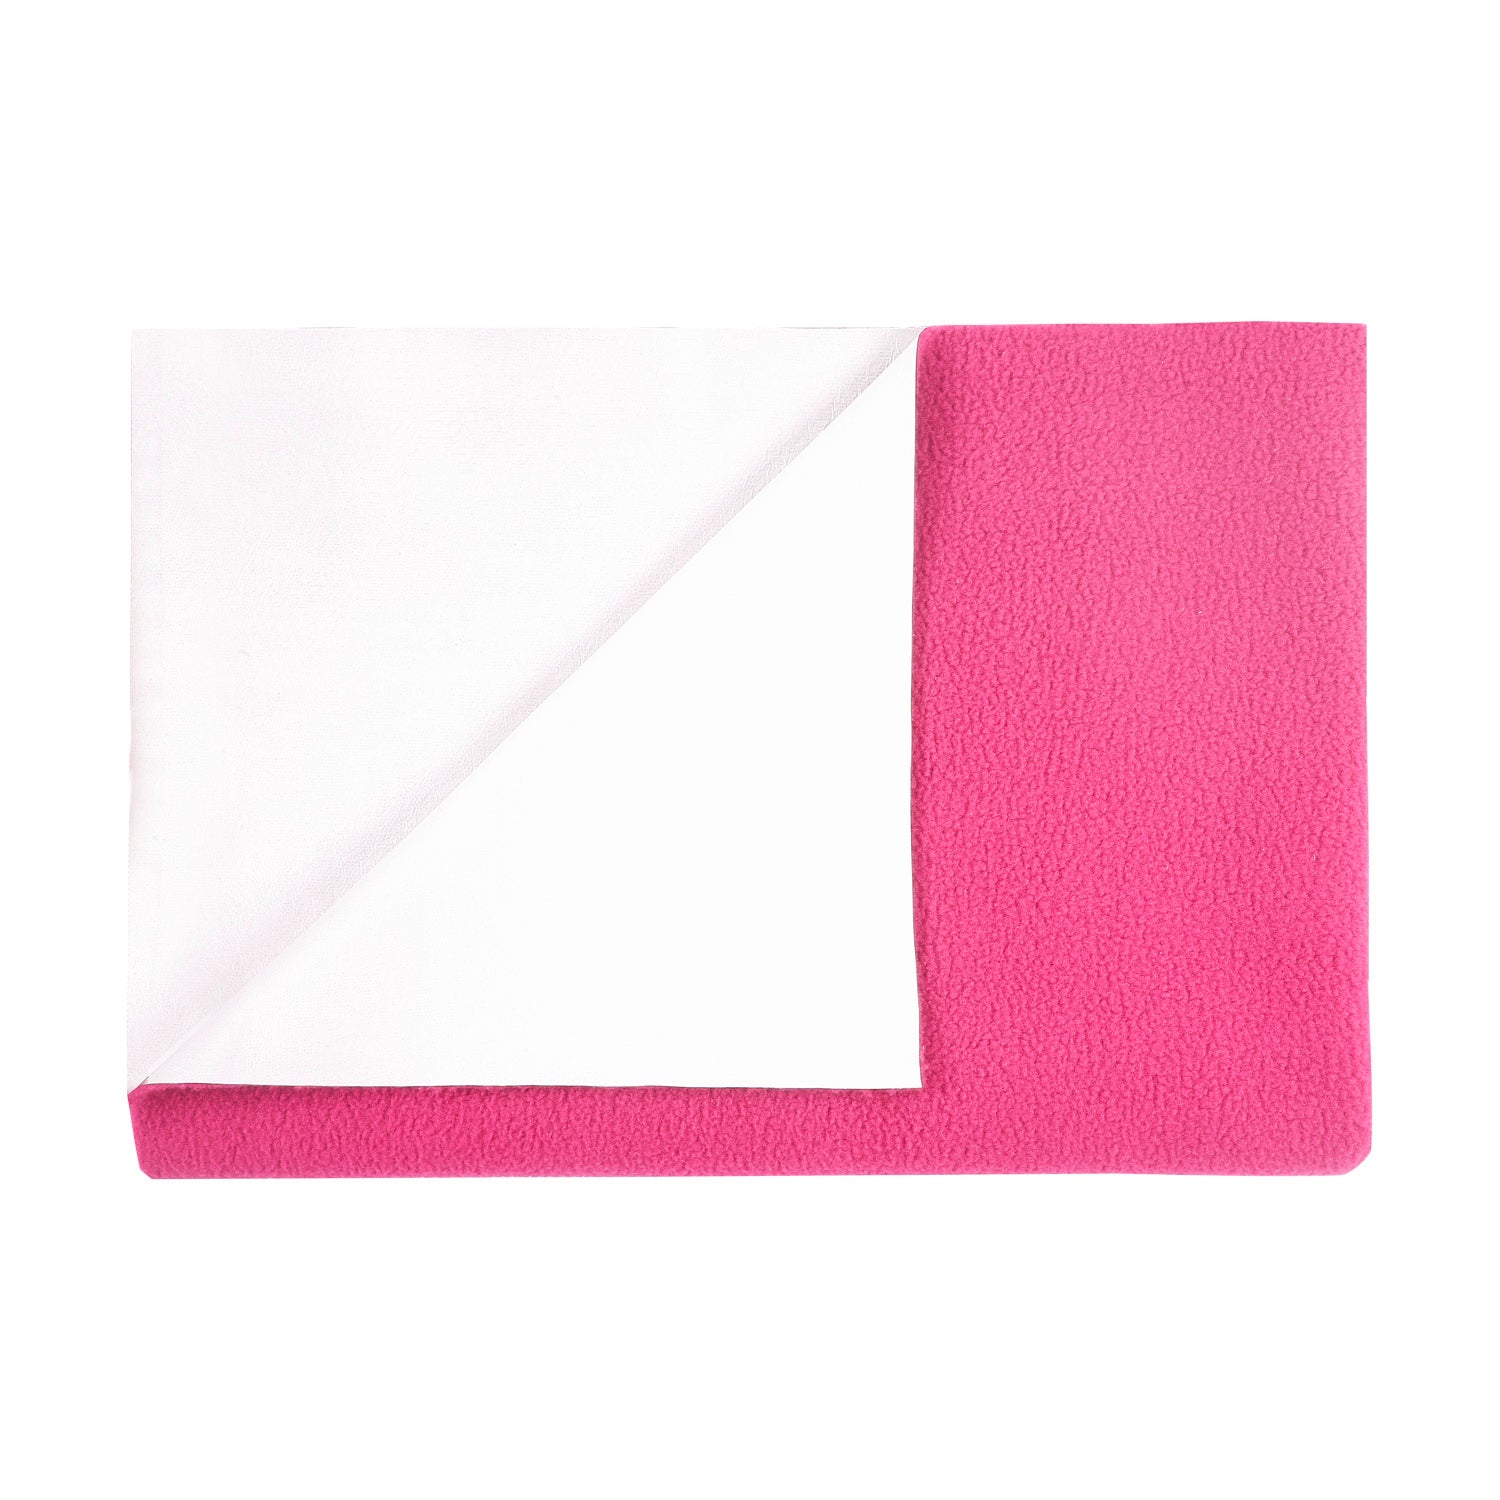 Plain Magenta Water-Resistant Bed Protector - 3 Sizes - Baby Moo